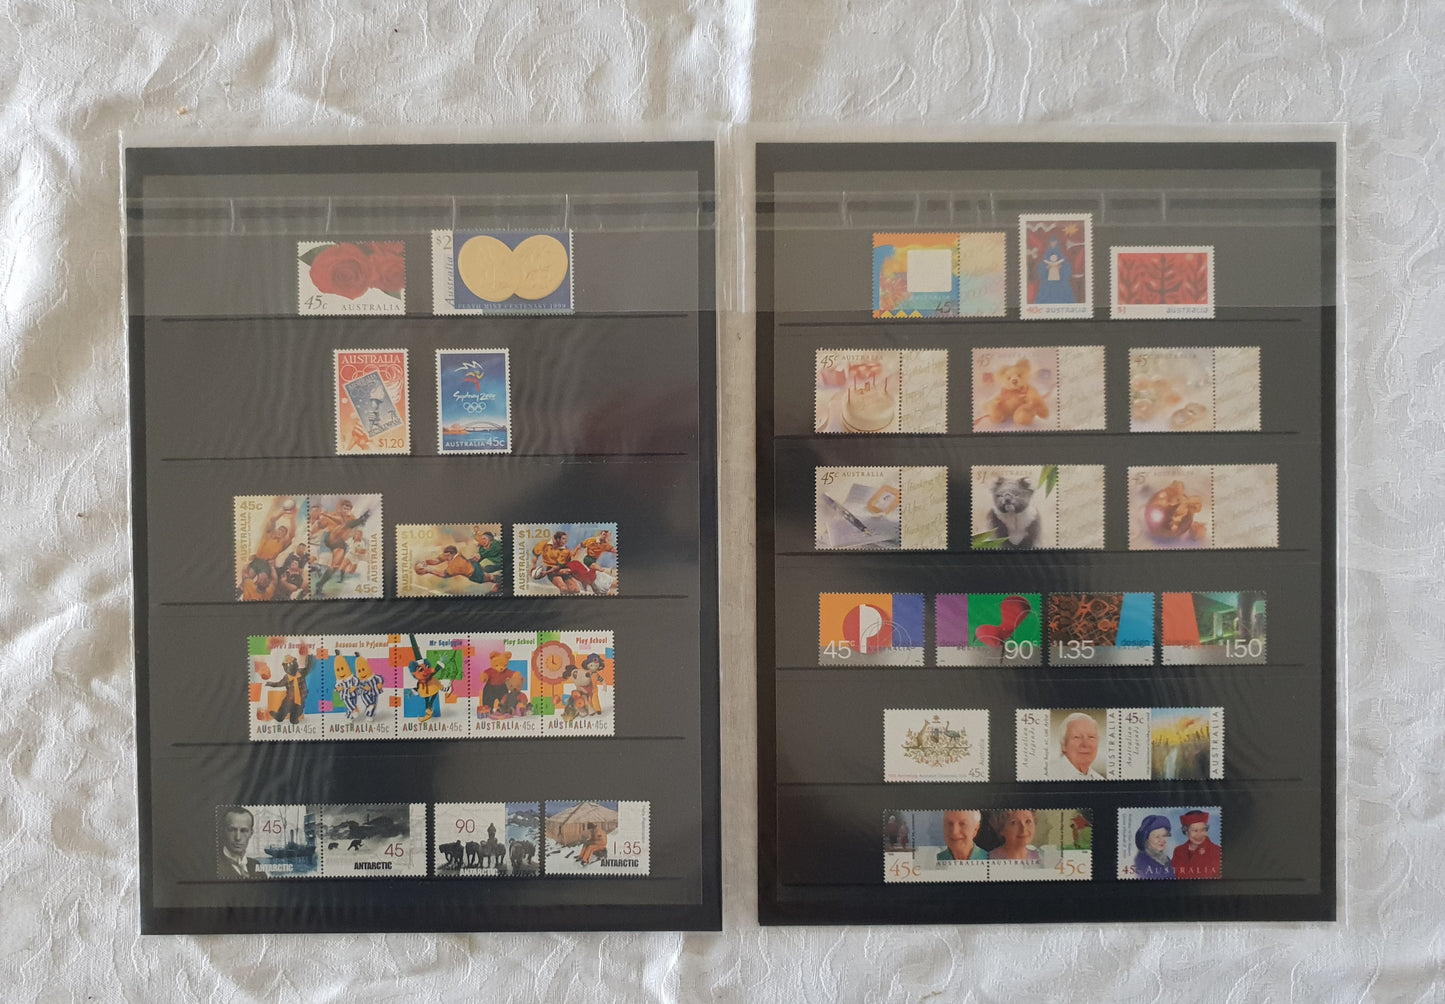 The Collection of 1999 Australian Stamps